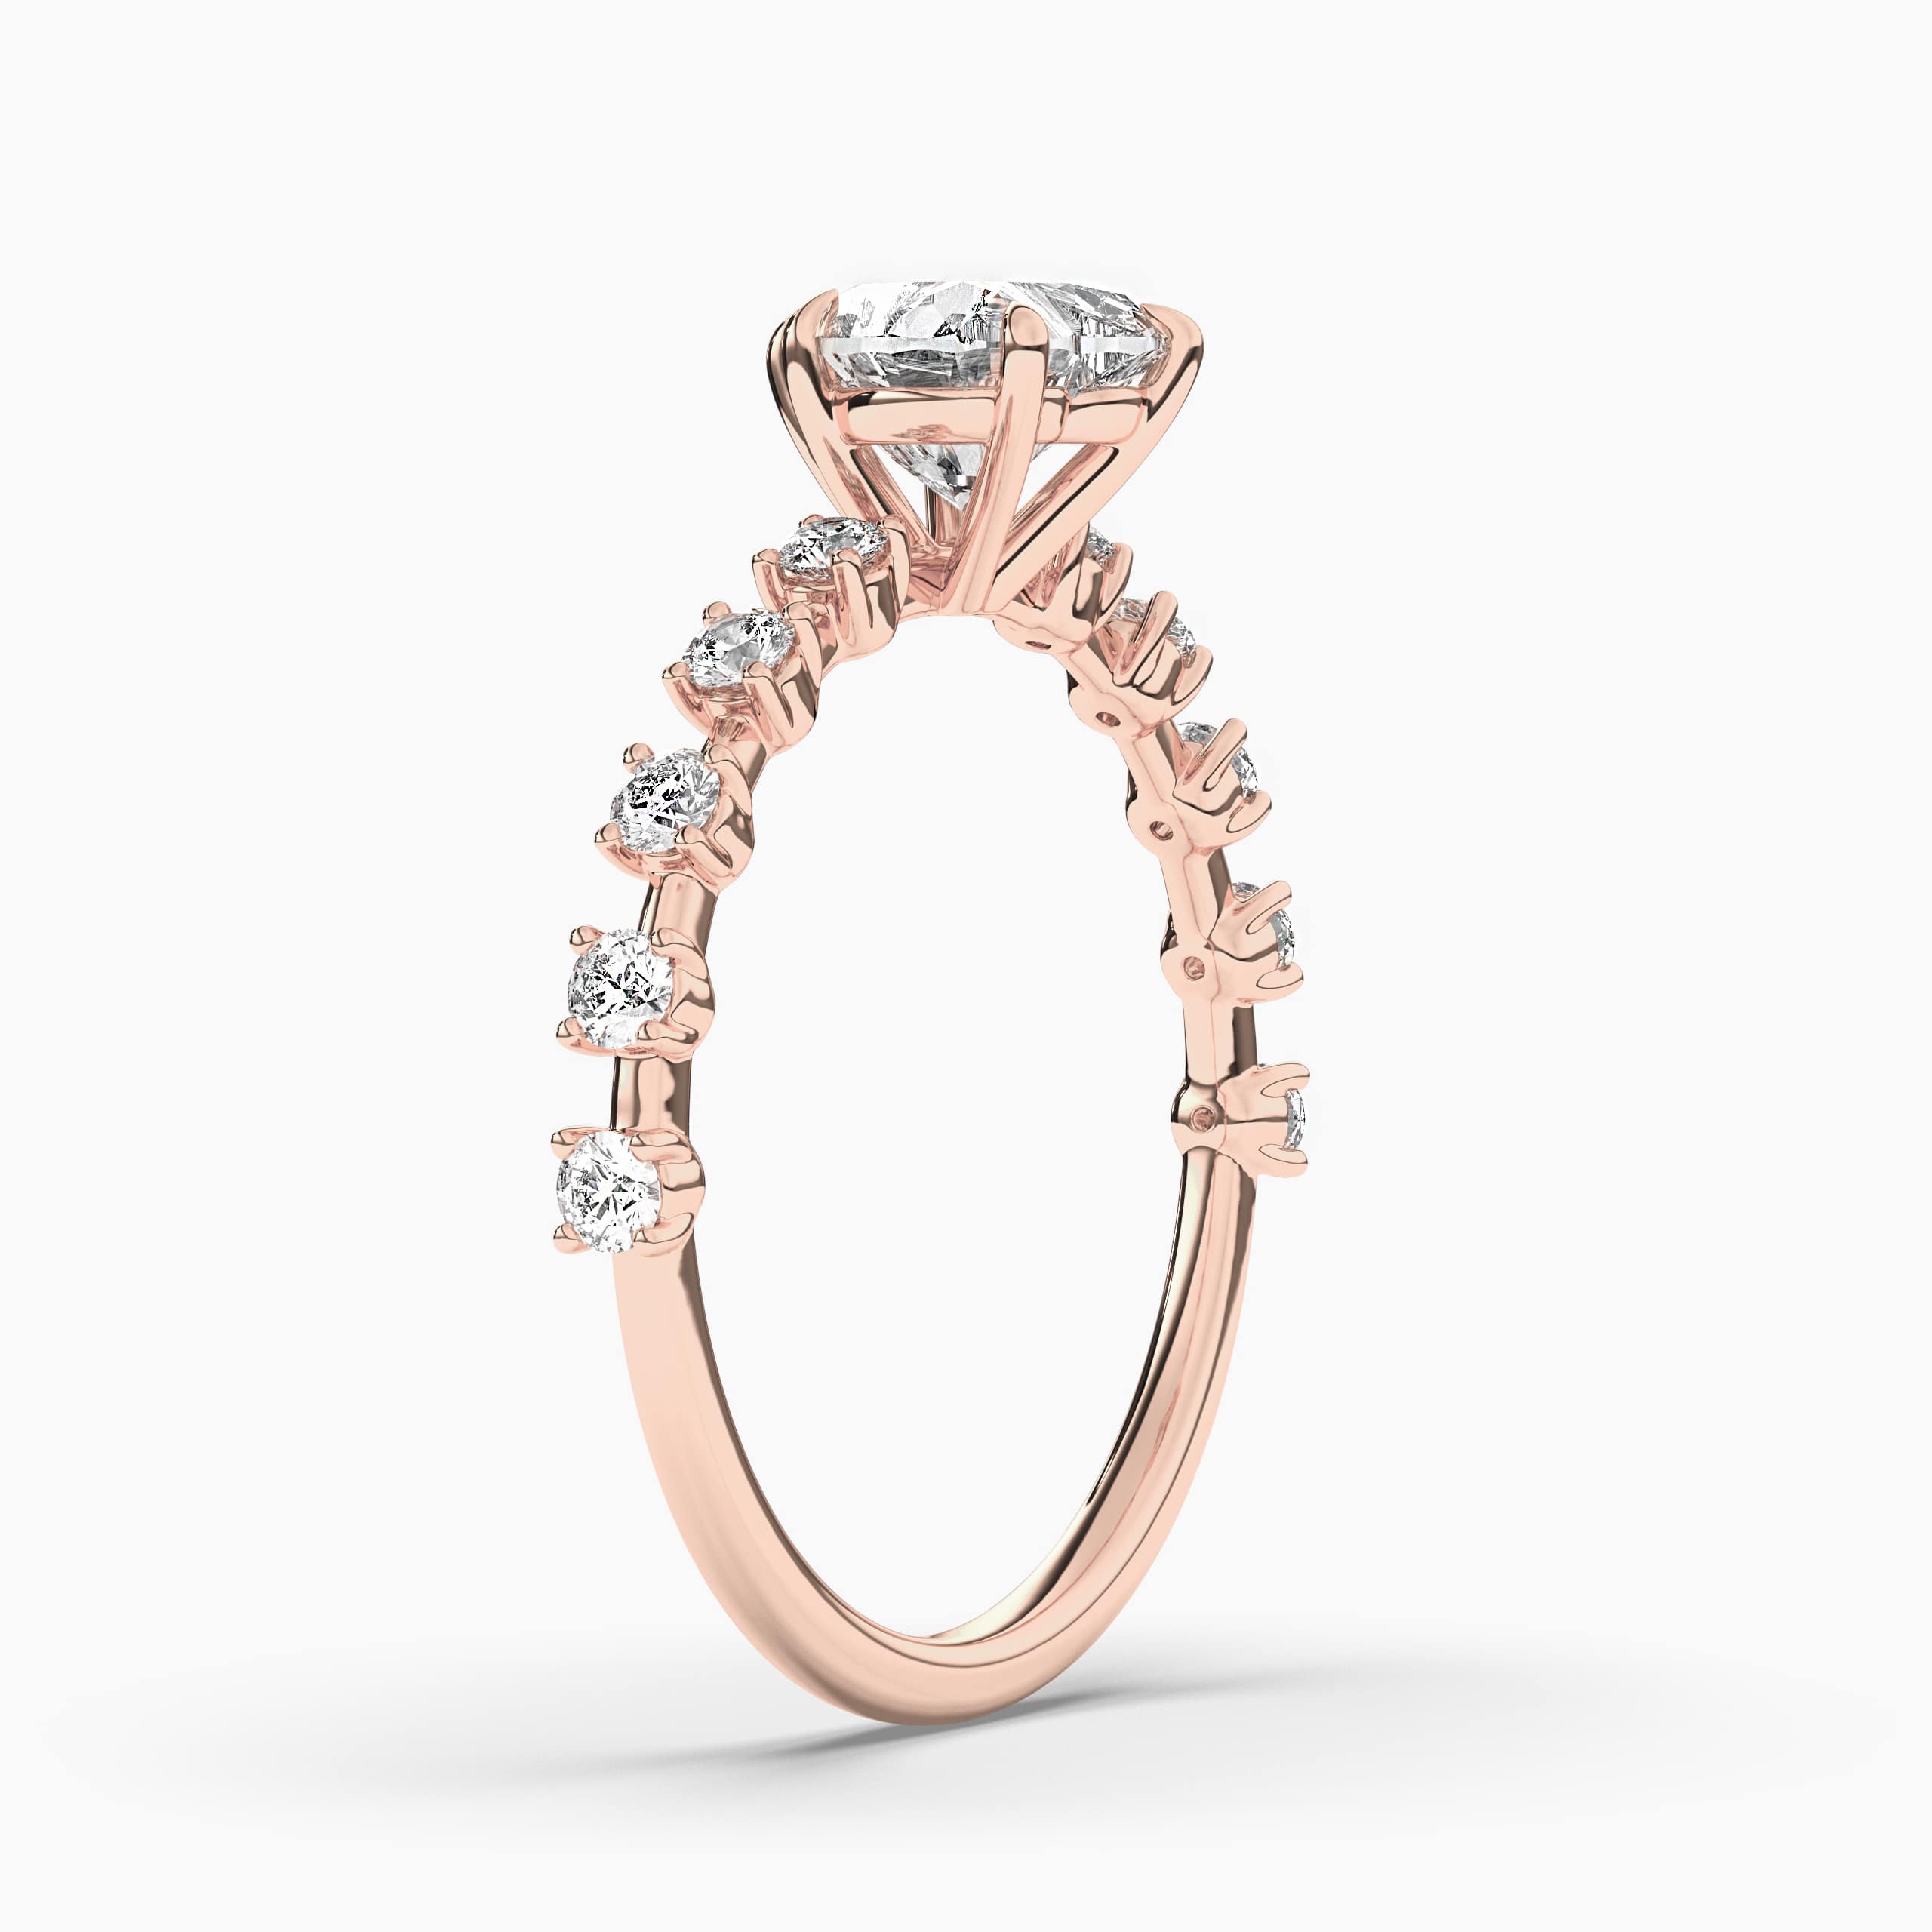 14K Rose Gold Heart Shaped Engagement Ring with Pave Diamonds